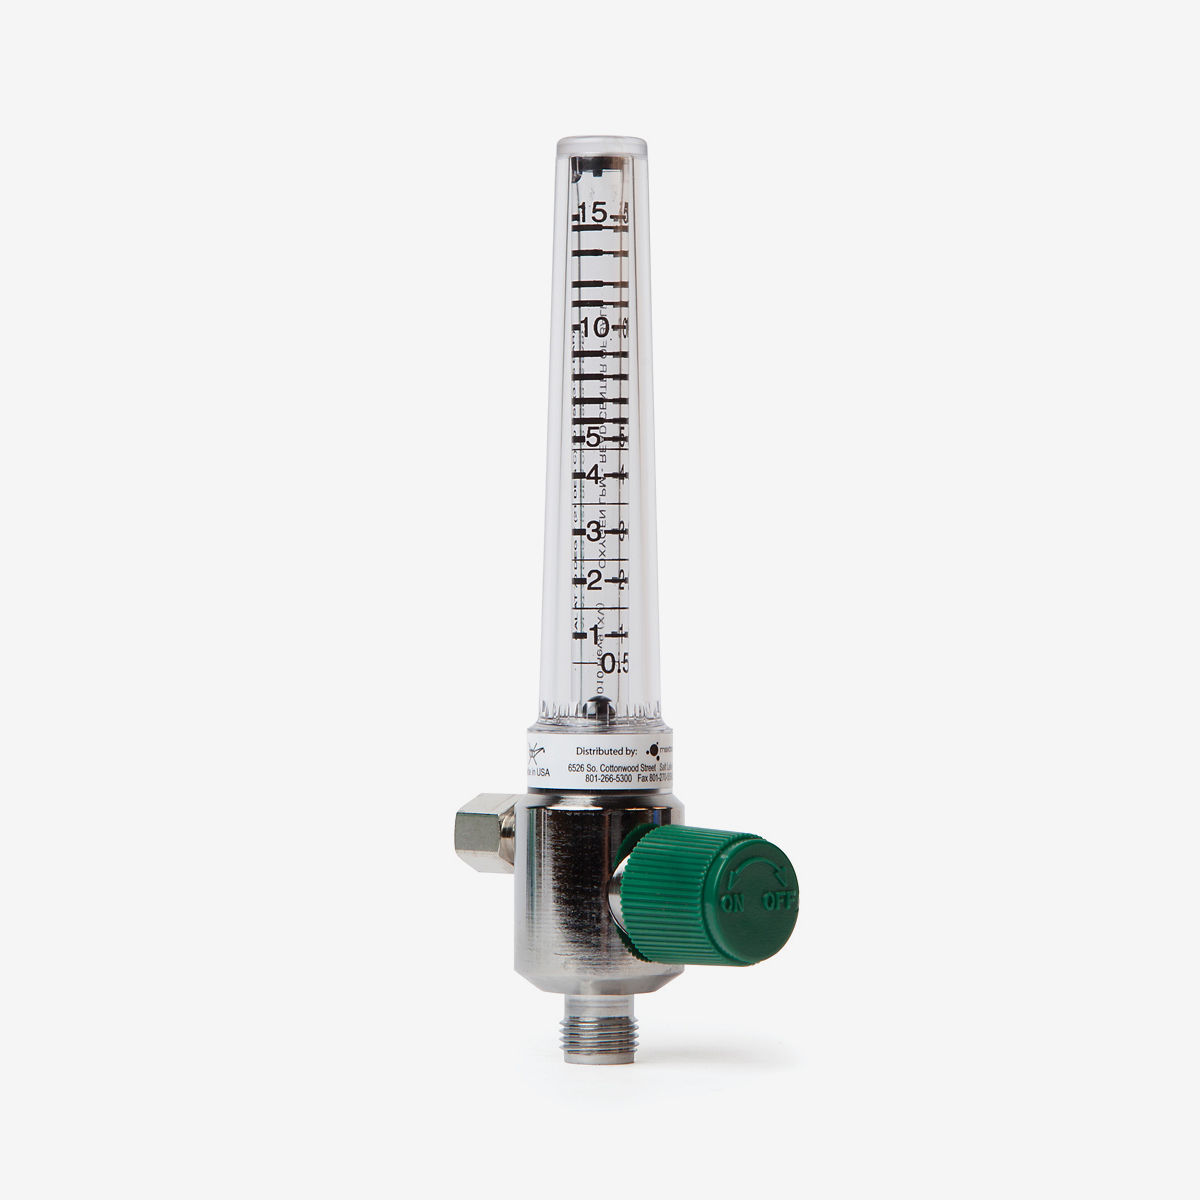 0-15 liters per minute flow meter with green knob on white background, shown at angle